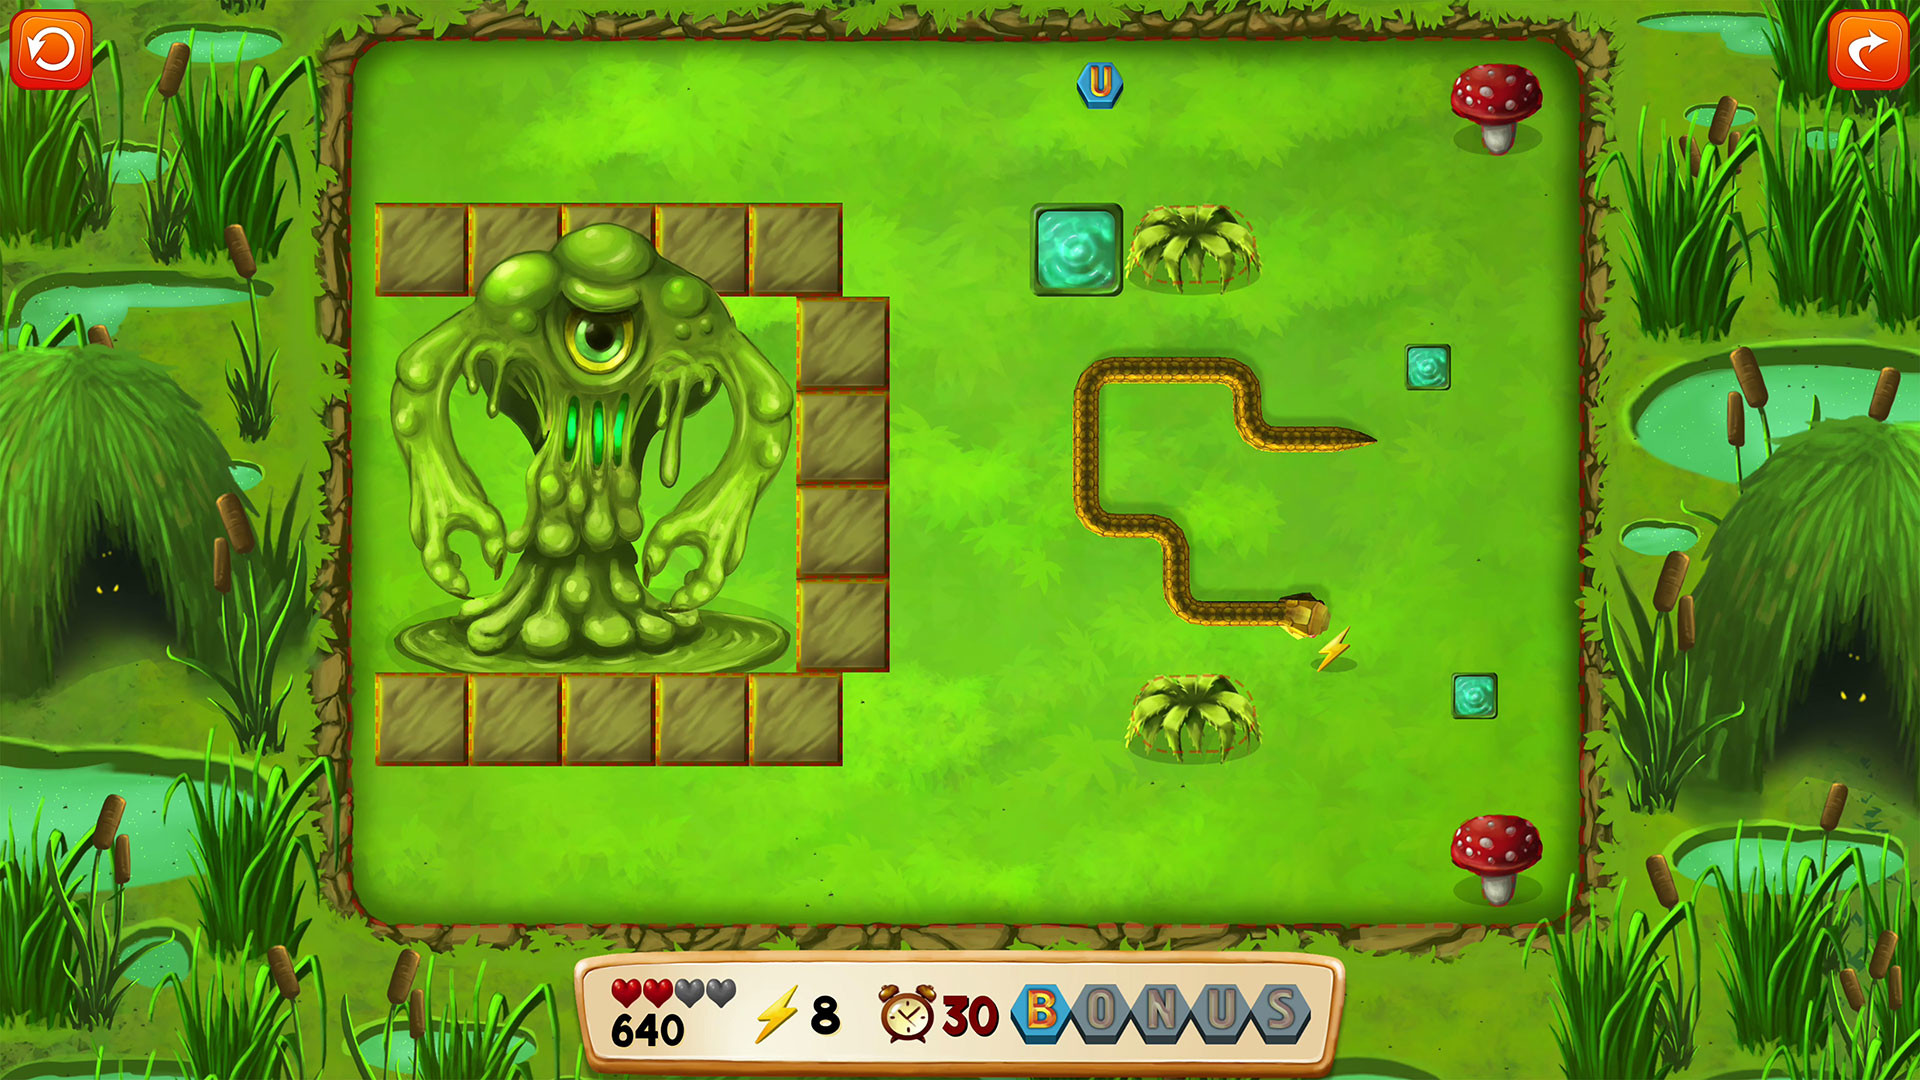 Classic Snake Game: Adventure – Apps no Google Play